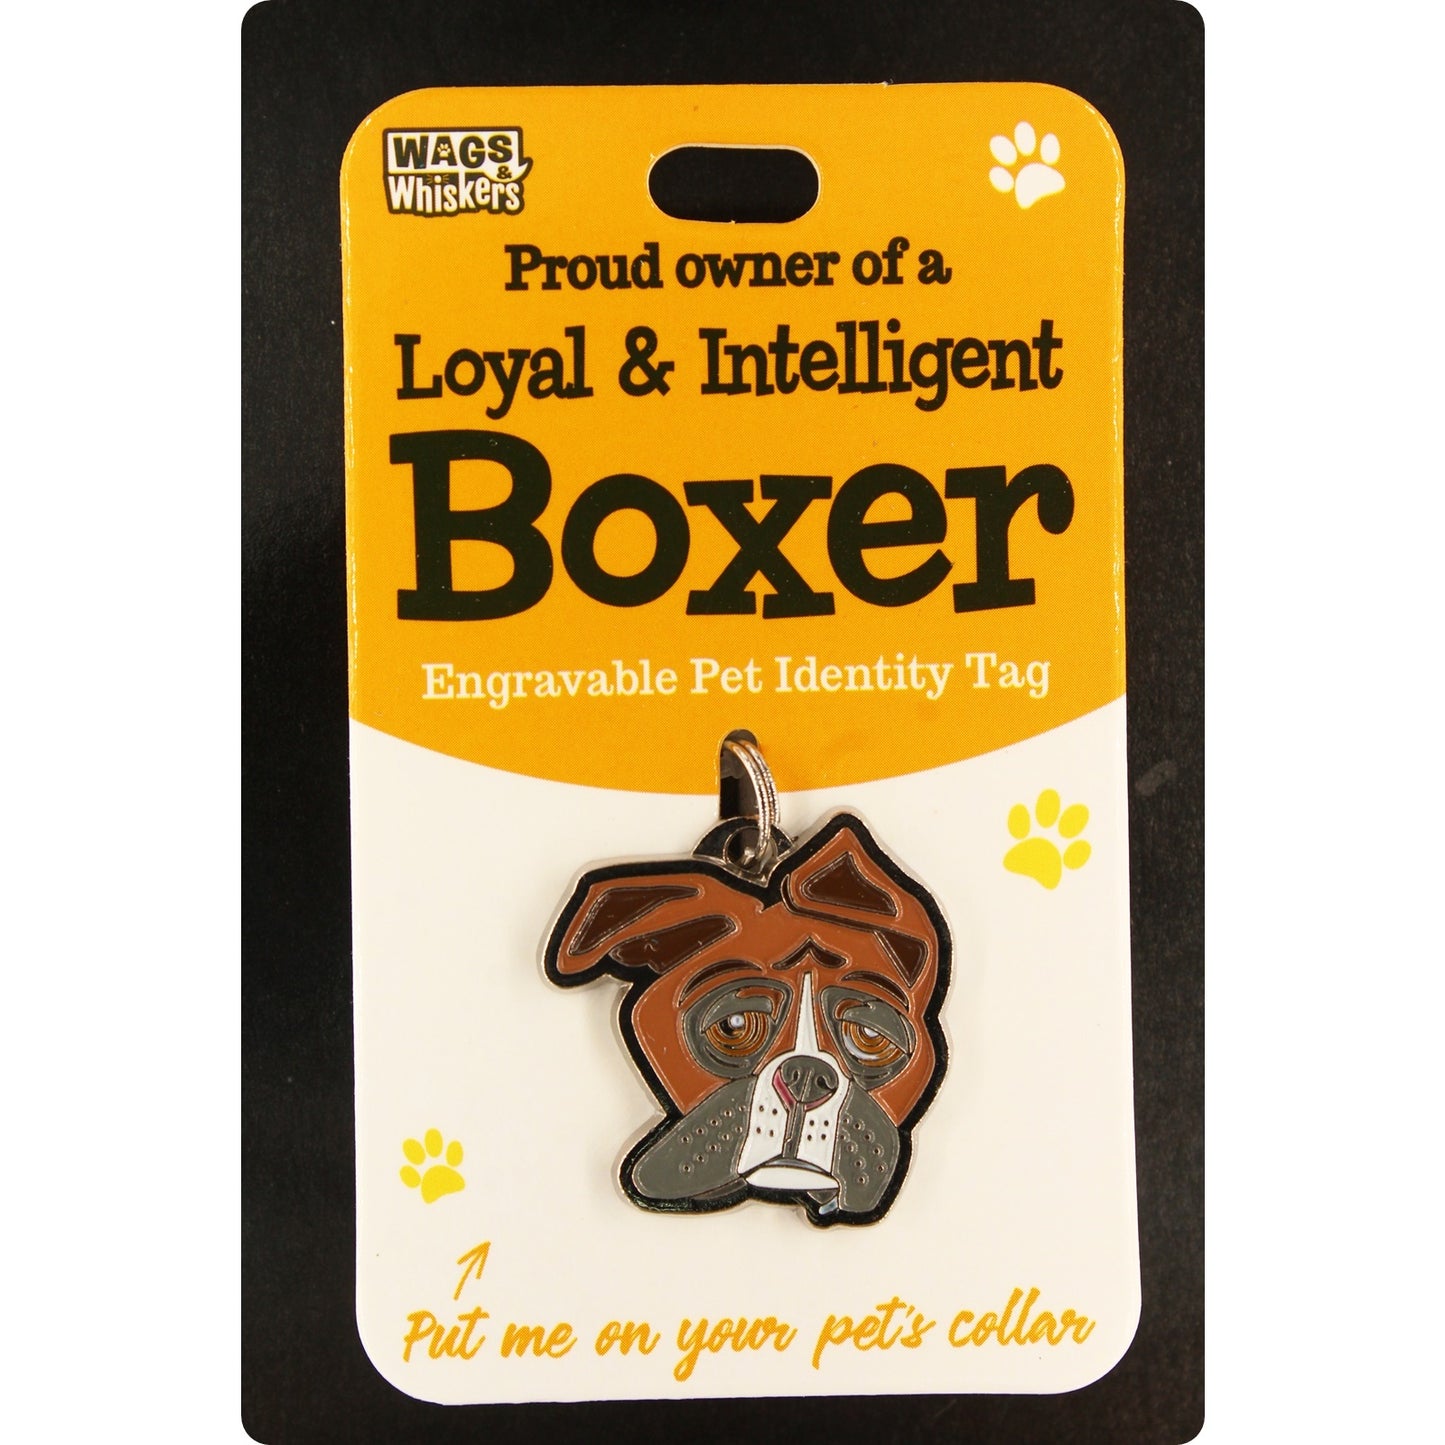 DESIRABLE GIFTS BOXER WAGS & WHISKERS DOG PET TAG I CAN NOT ENGRAVE THIS ITEM